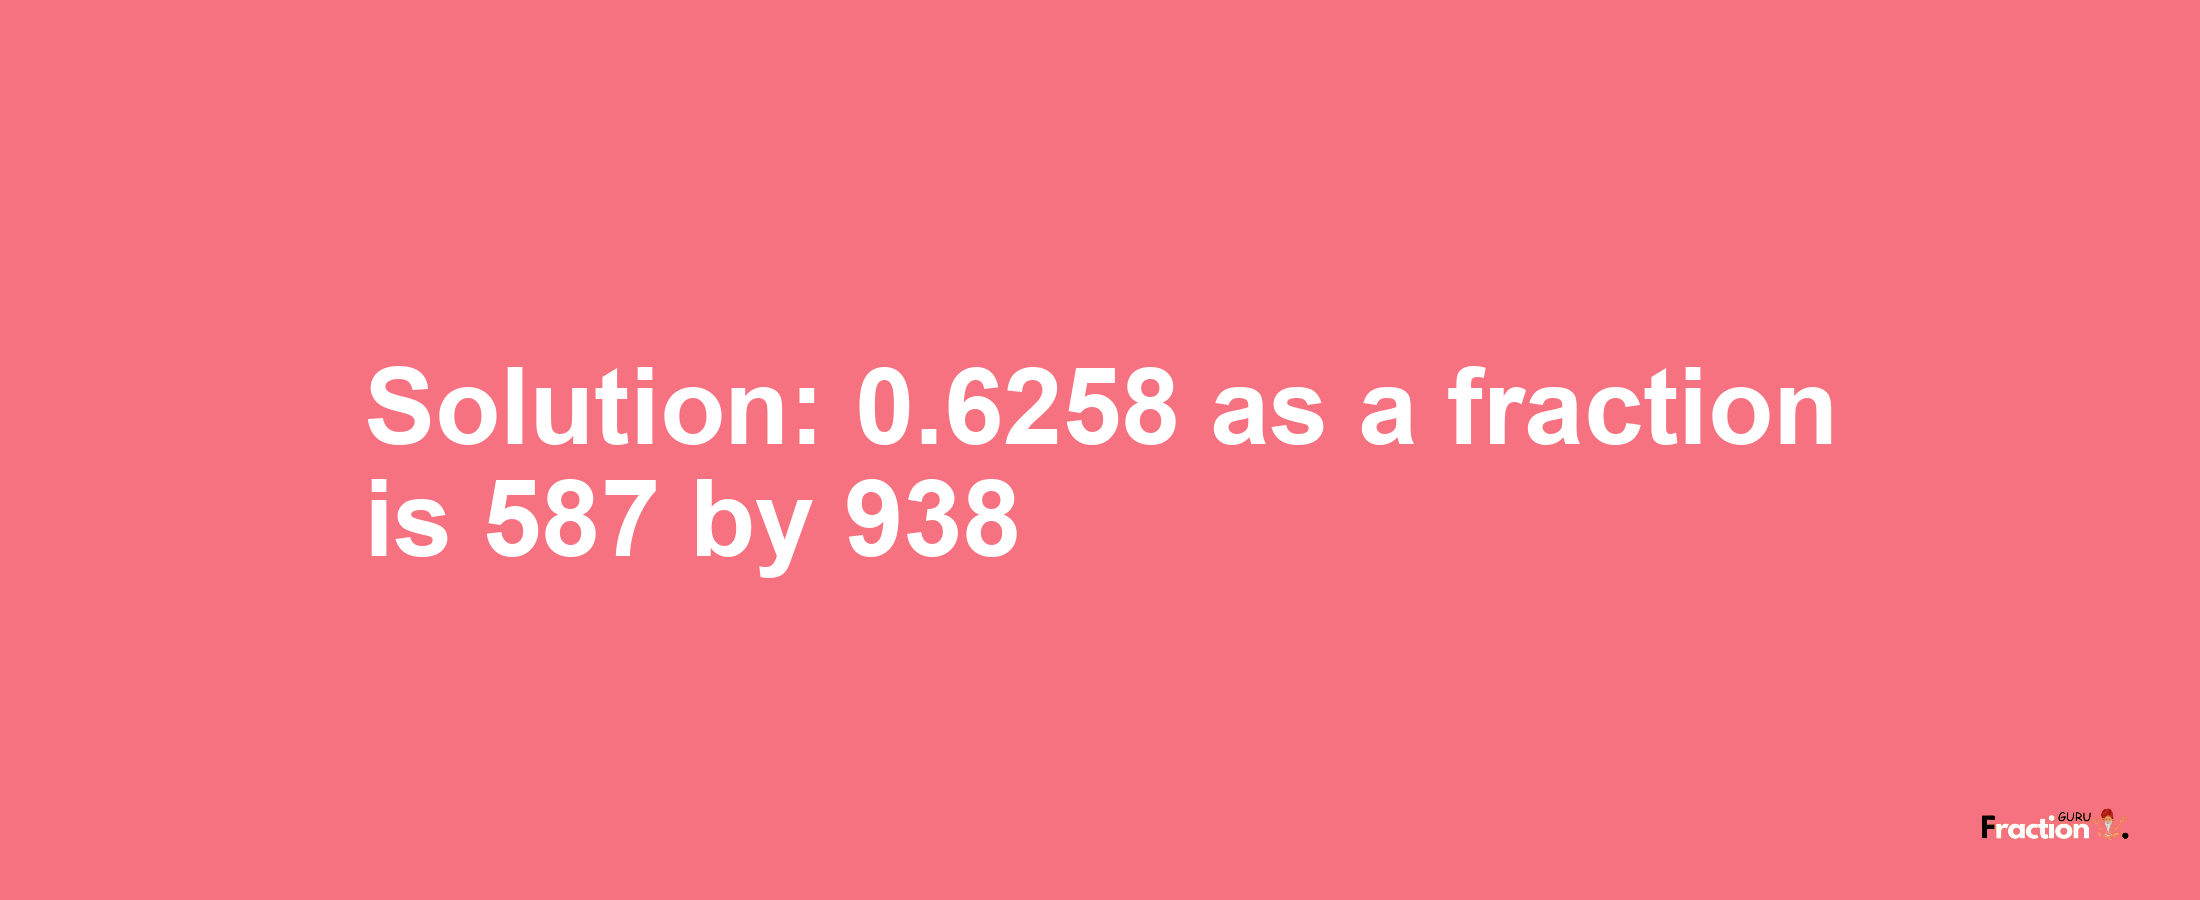 Solution:0.6258 as a fraction is 587/938